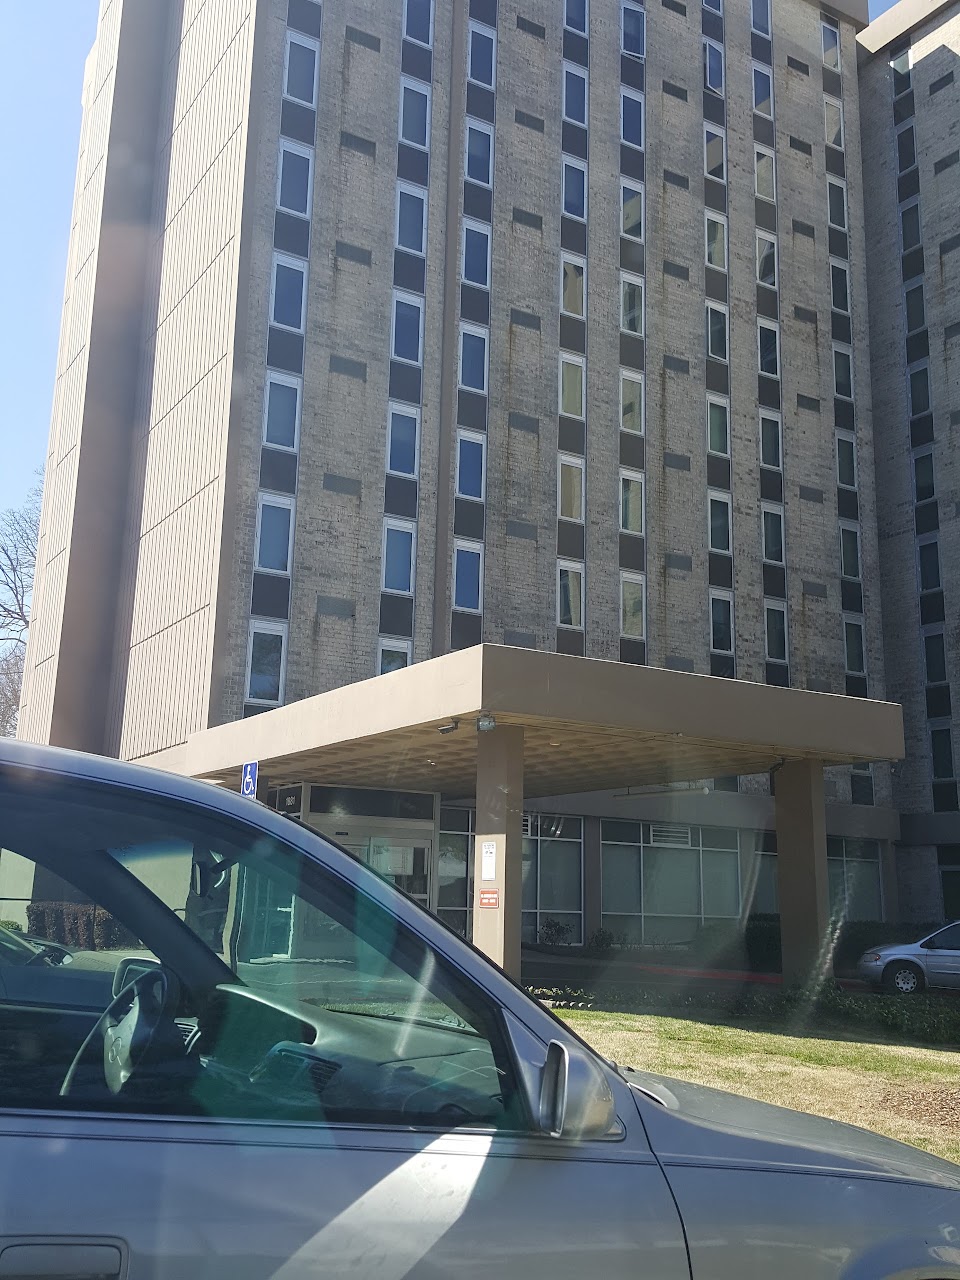 Photo of BAPTIST TOWERS. Affordable housing located at 1881 MYRTLE DR SW ATLANTA, GA 30311